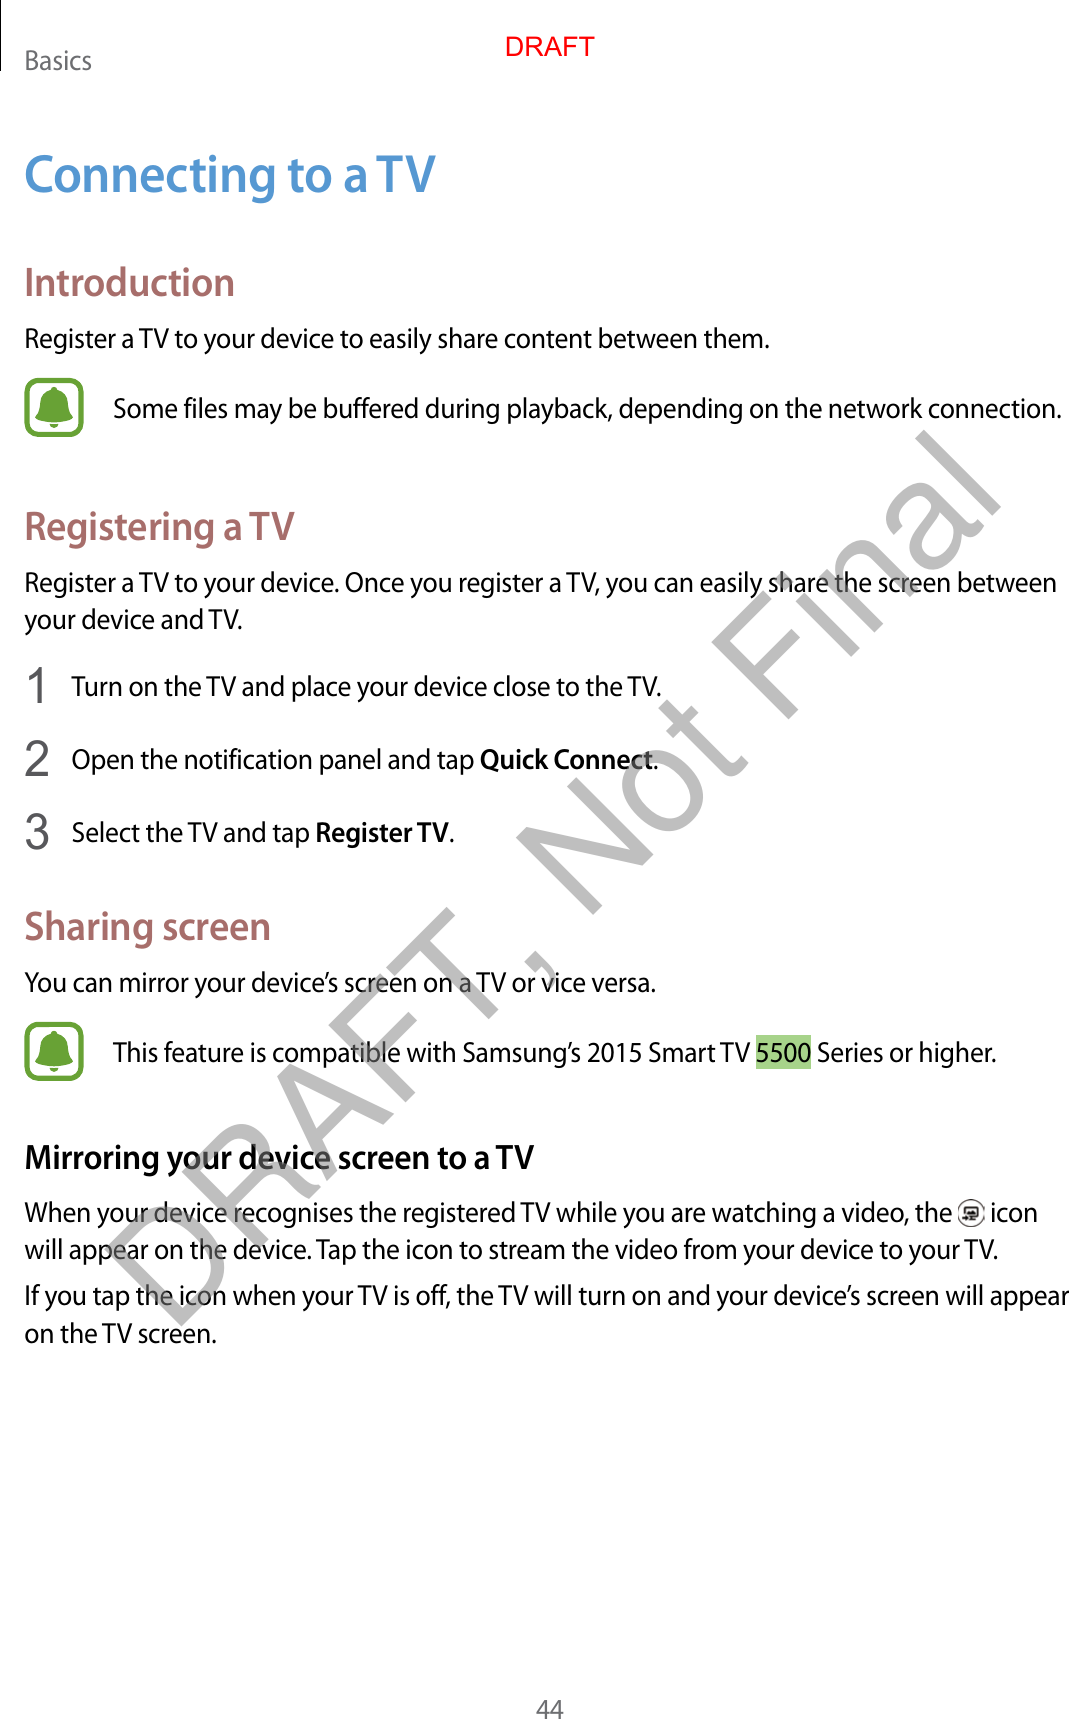 Basics44Connecting to a TVIntroductionRegister a TV to your device to easily share content between them.Some files may be buffered during playback, depending on the network connection.Registering a TVRegister a TV to your device. Once you register a TV, you can easily share the screen between your device and TV.1  Turn on the TV and place your device close to the TV.2  Open the notification panel and tap Quick Connect.3  Select the TV and tap Register TV.Sharing screenYou can mirror your device’s screen on a TV or vice versa.This feature is compatible with Samsung’s 2015 Smart TV 5500 Series or higher.Mirroring your device screen to a TVWhen your device recognises the registered TV while you are watching a video, the   icon will appear on the device. Tap the icon to stream the video from your device to your TV.If you tap the icon when your TV is off, the TV will turn on and your device’s screen will appear on the TV screen.DRAFTDRAFT, Not Final